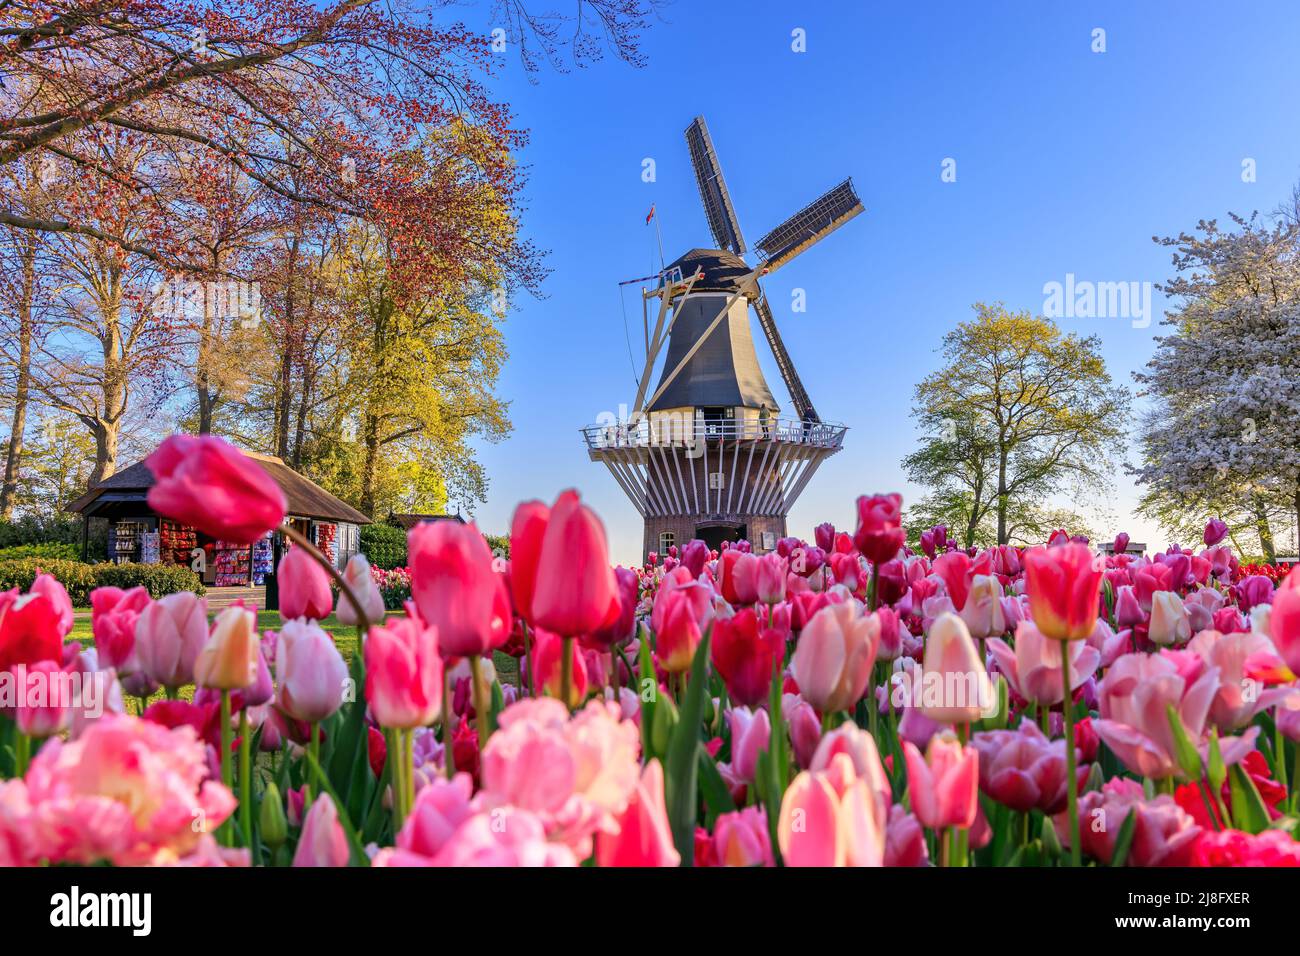 Blooming colorful tulips flowerbed in Keukenhof public flower garden with windmill. Lisse, Holland, Netherlands. Stock Photo